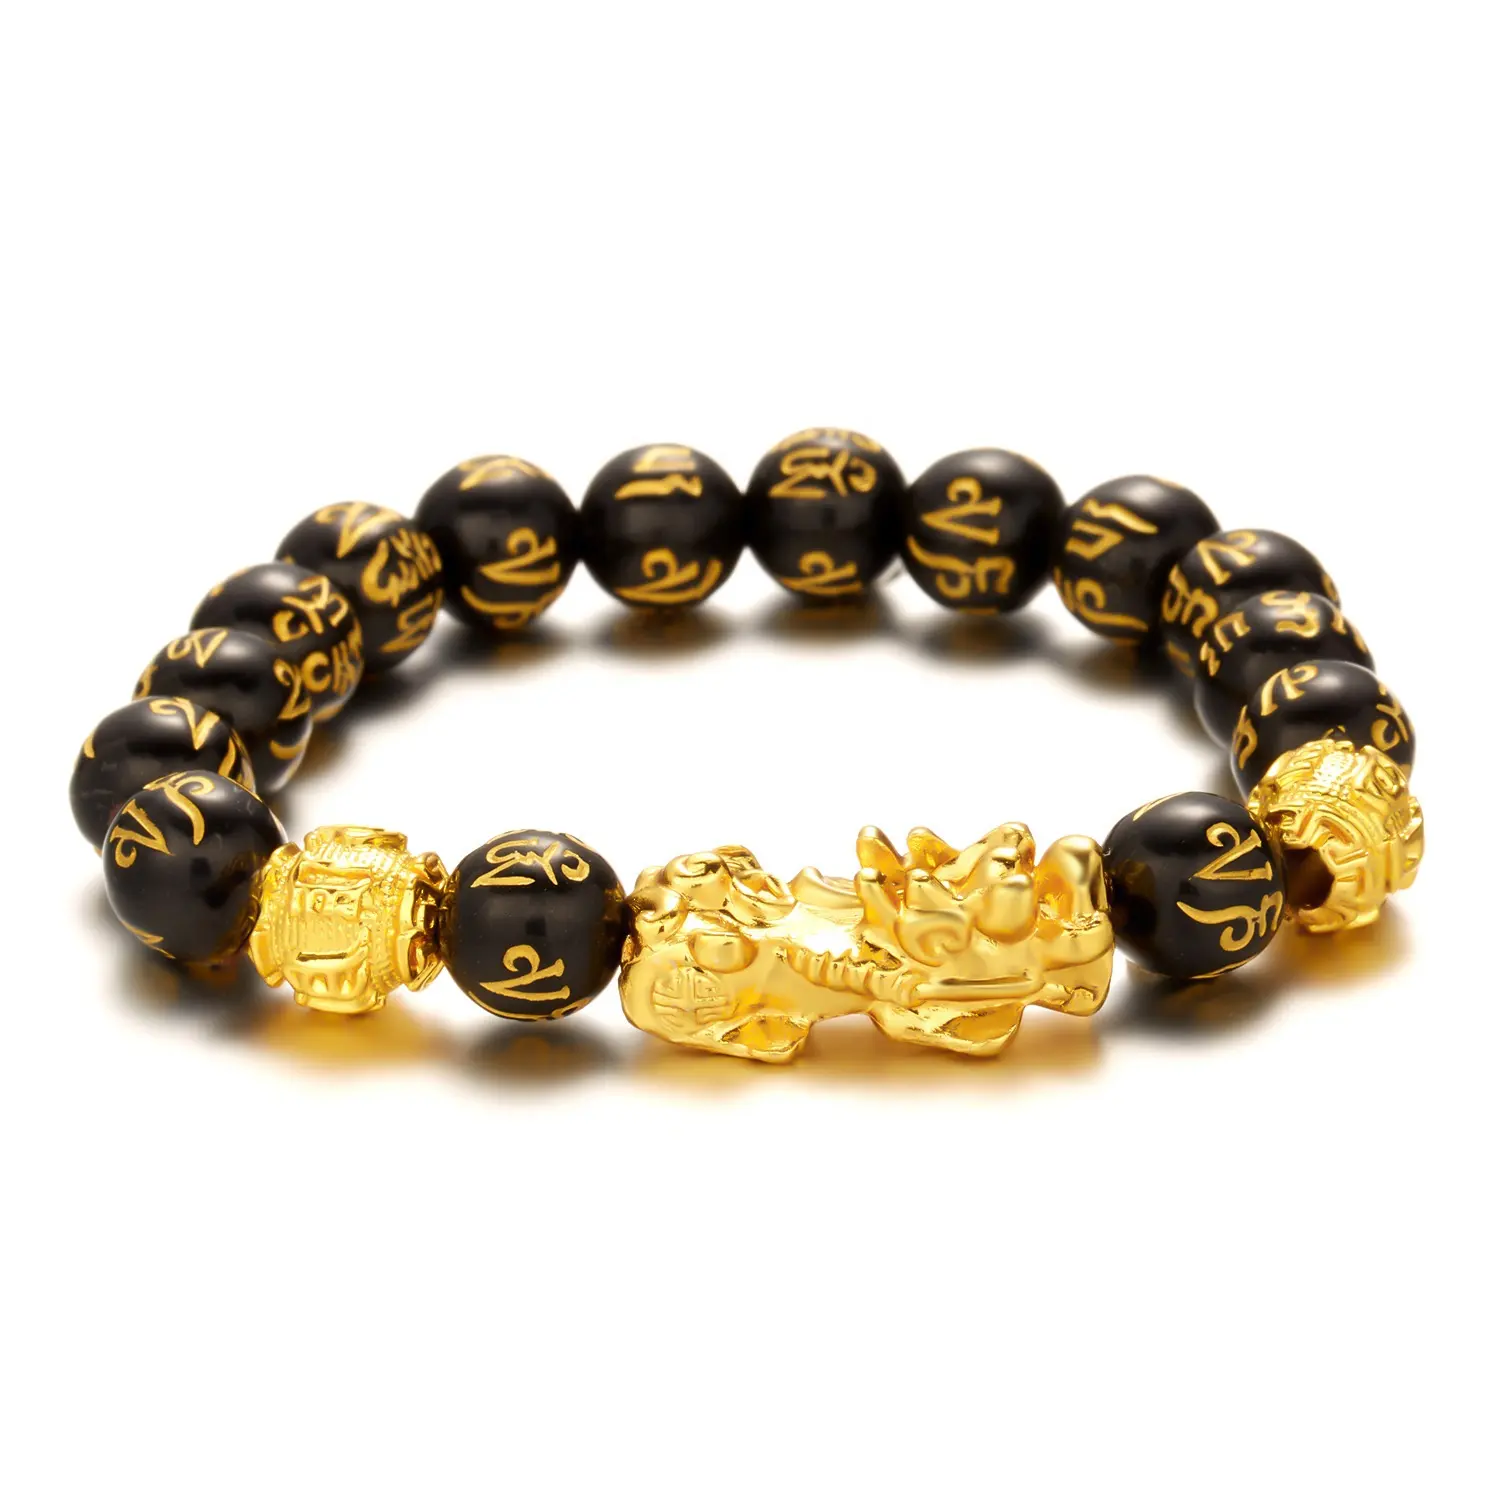 Hot Selling Personality Men's Natural Stone Beaded Jewelry Obsidian Pixiu Six-Character Mantra Elastic Bracelet